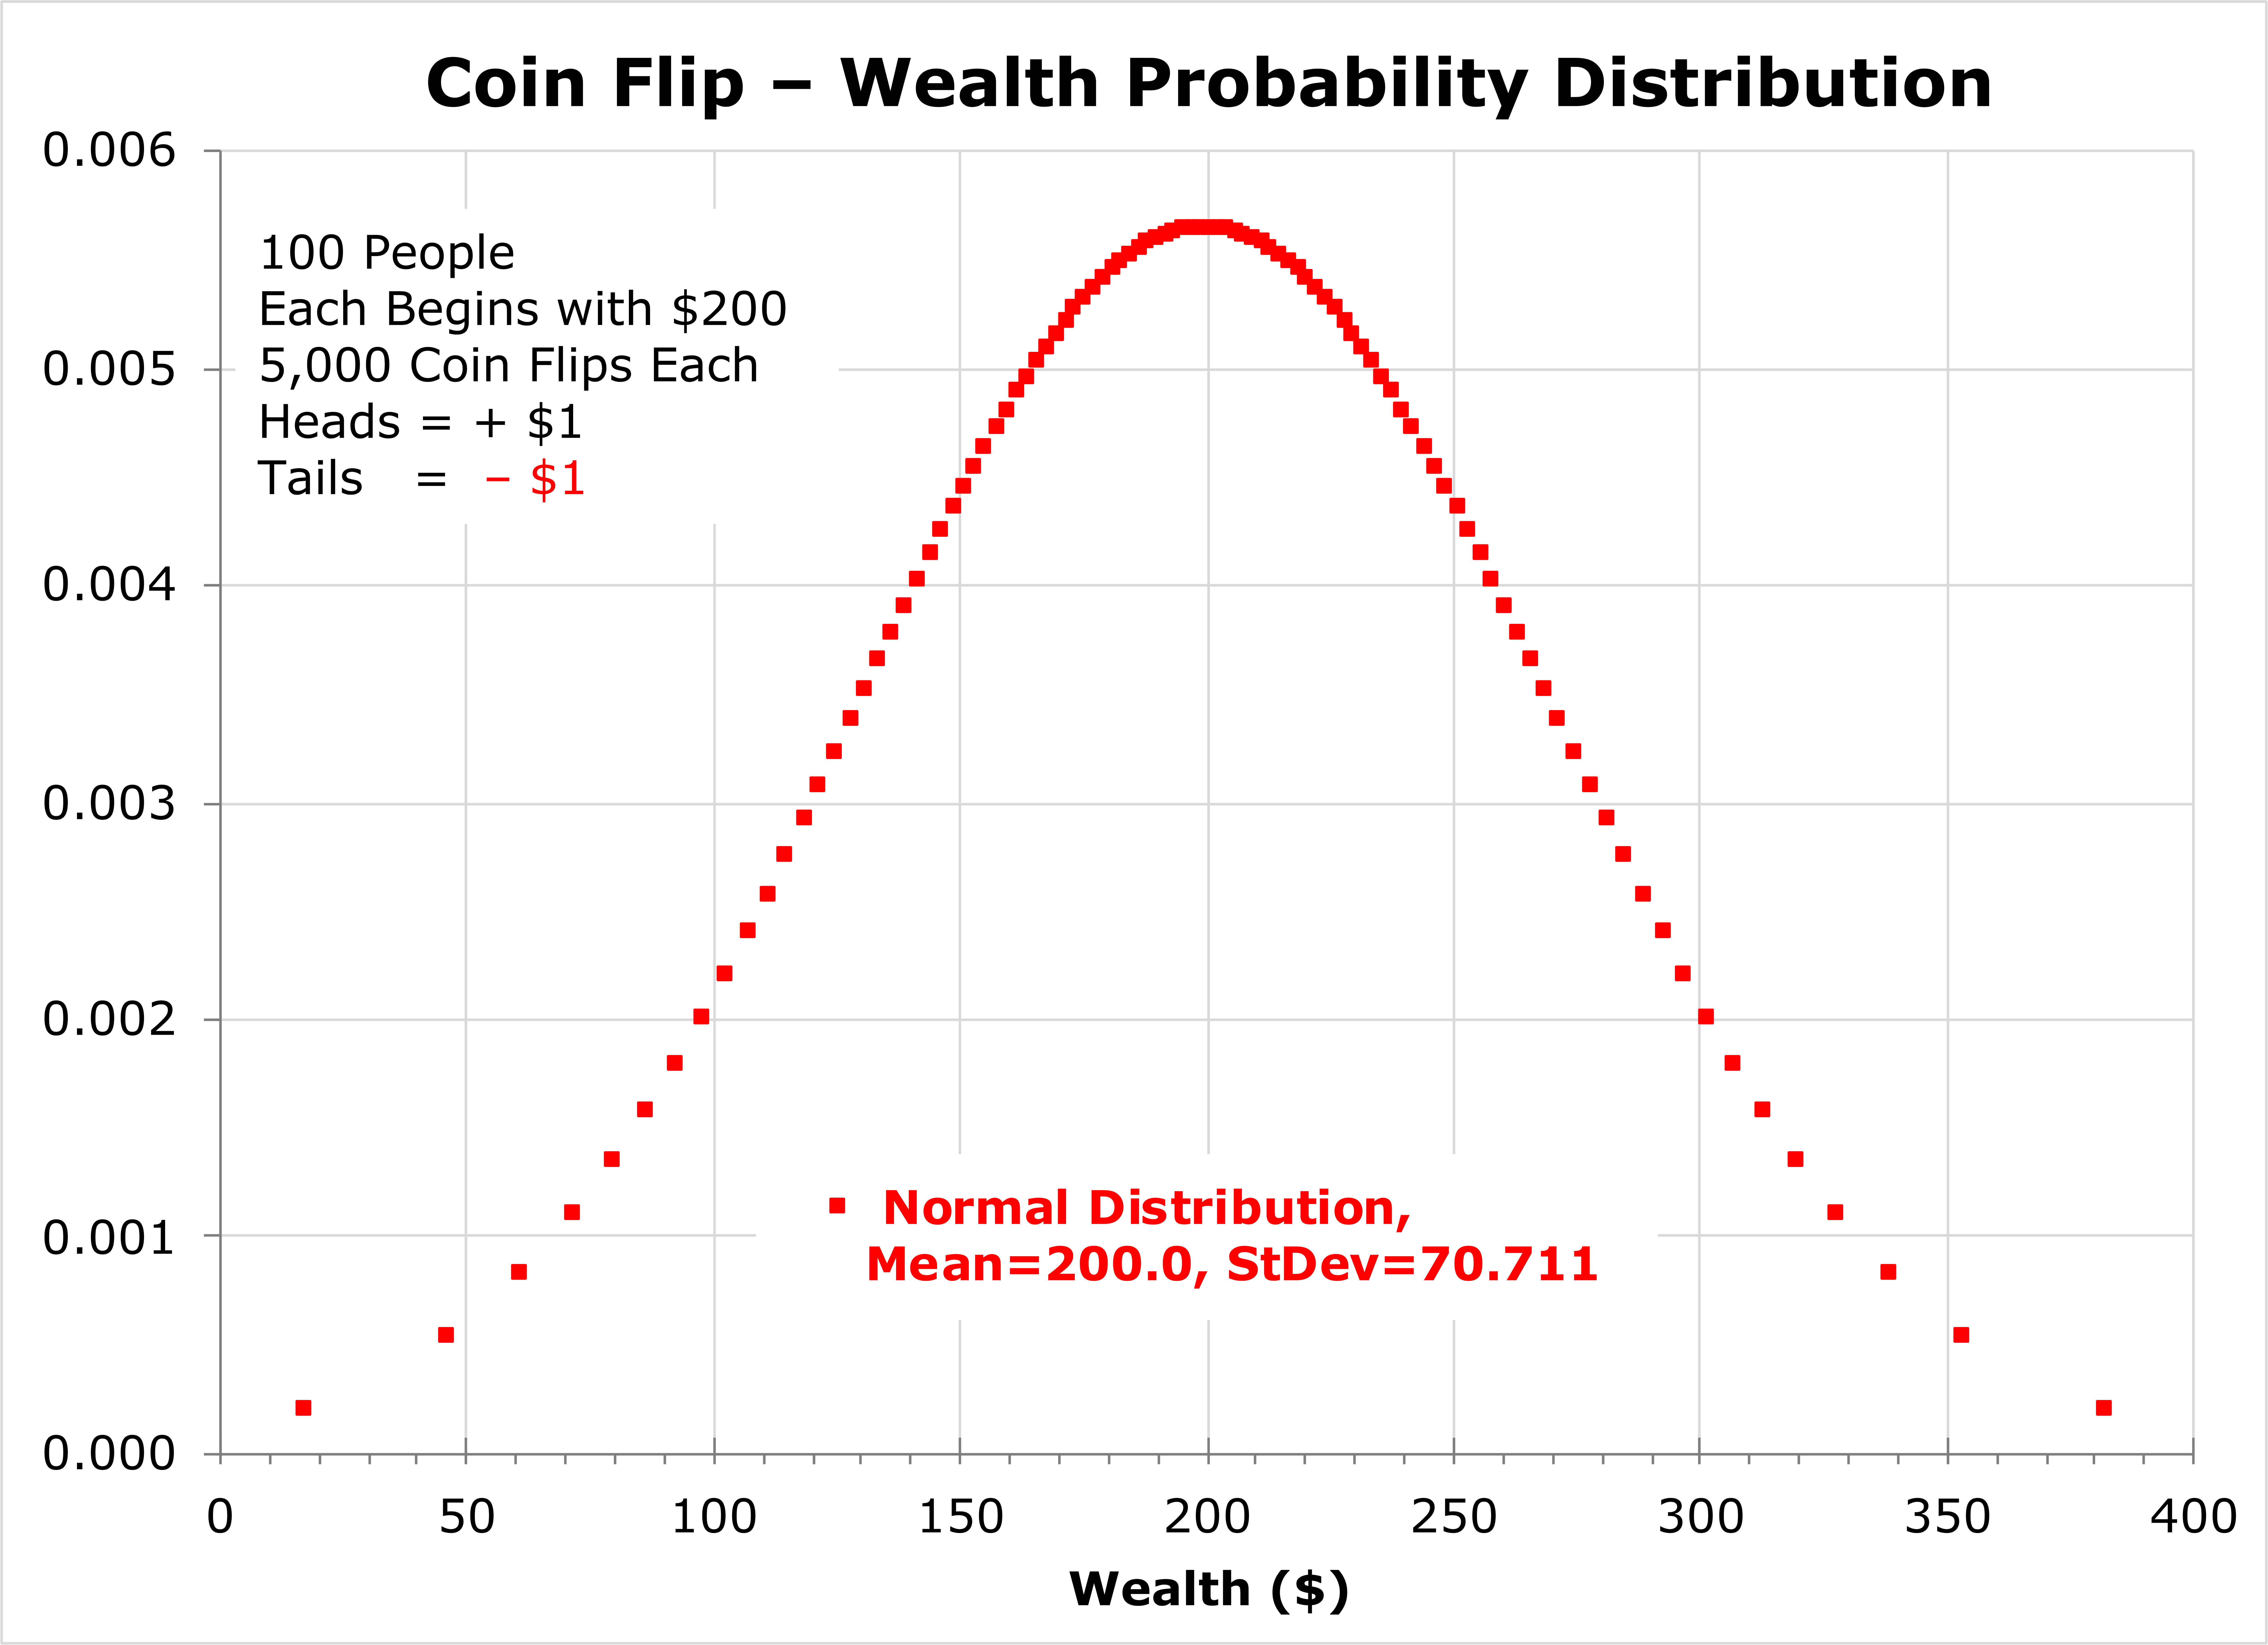 Coin flips of 5,000 rounds produces a normal distribution